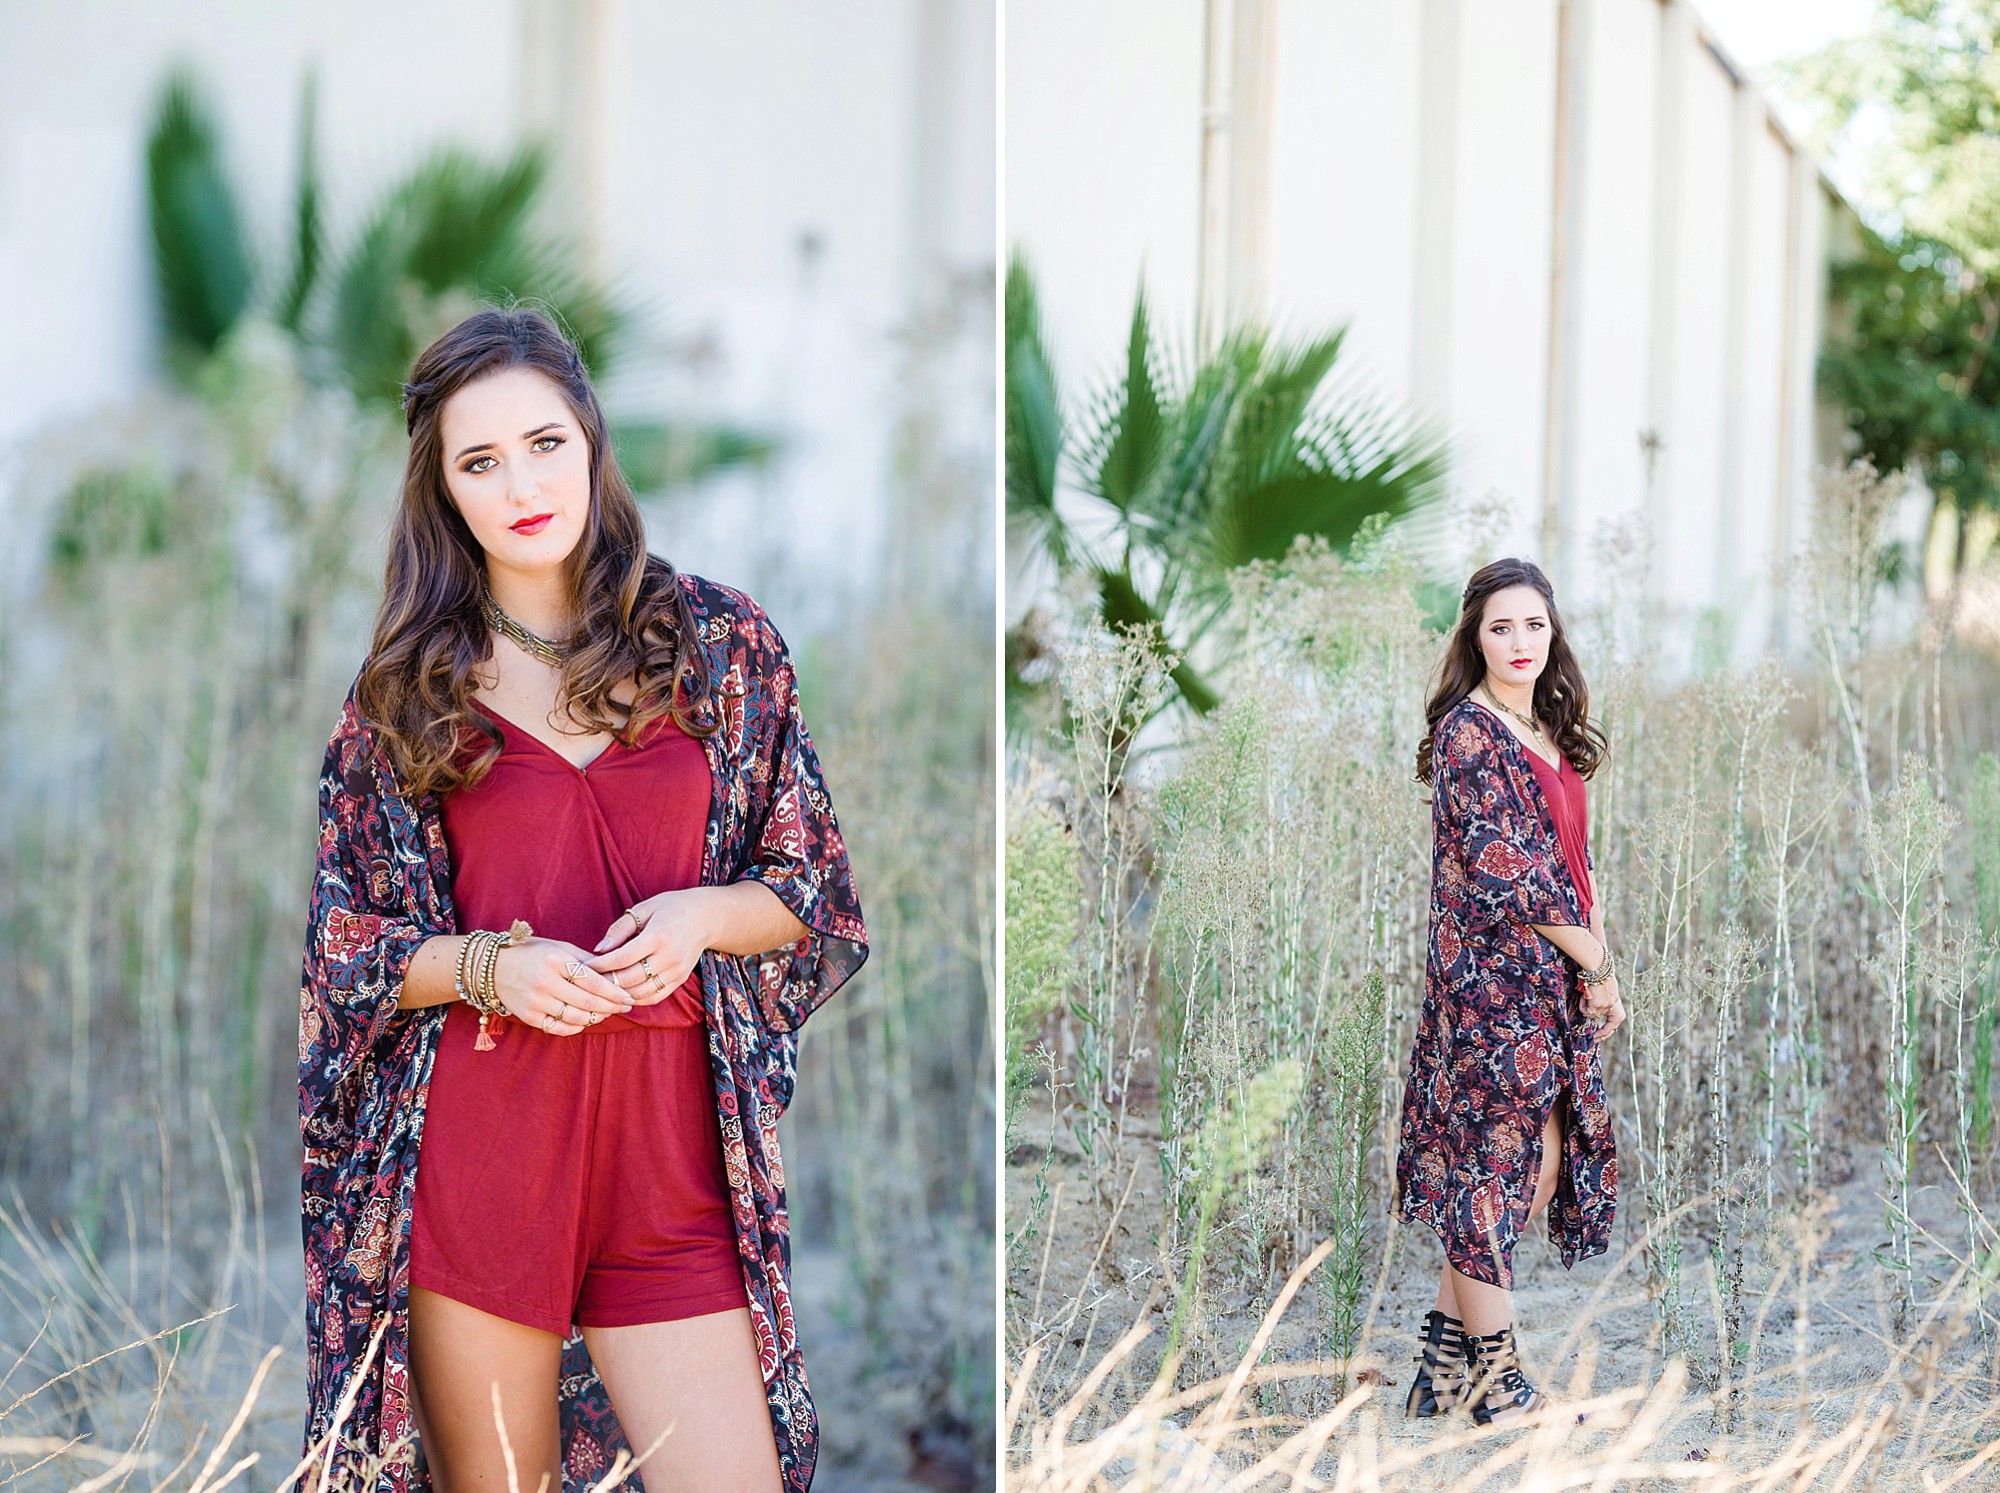 Girls senior picture styling ideas